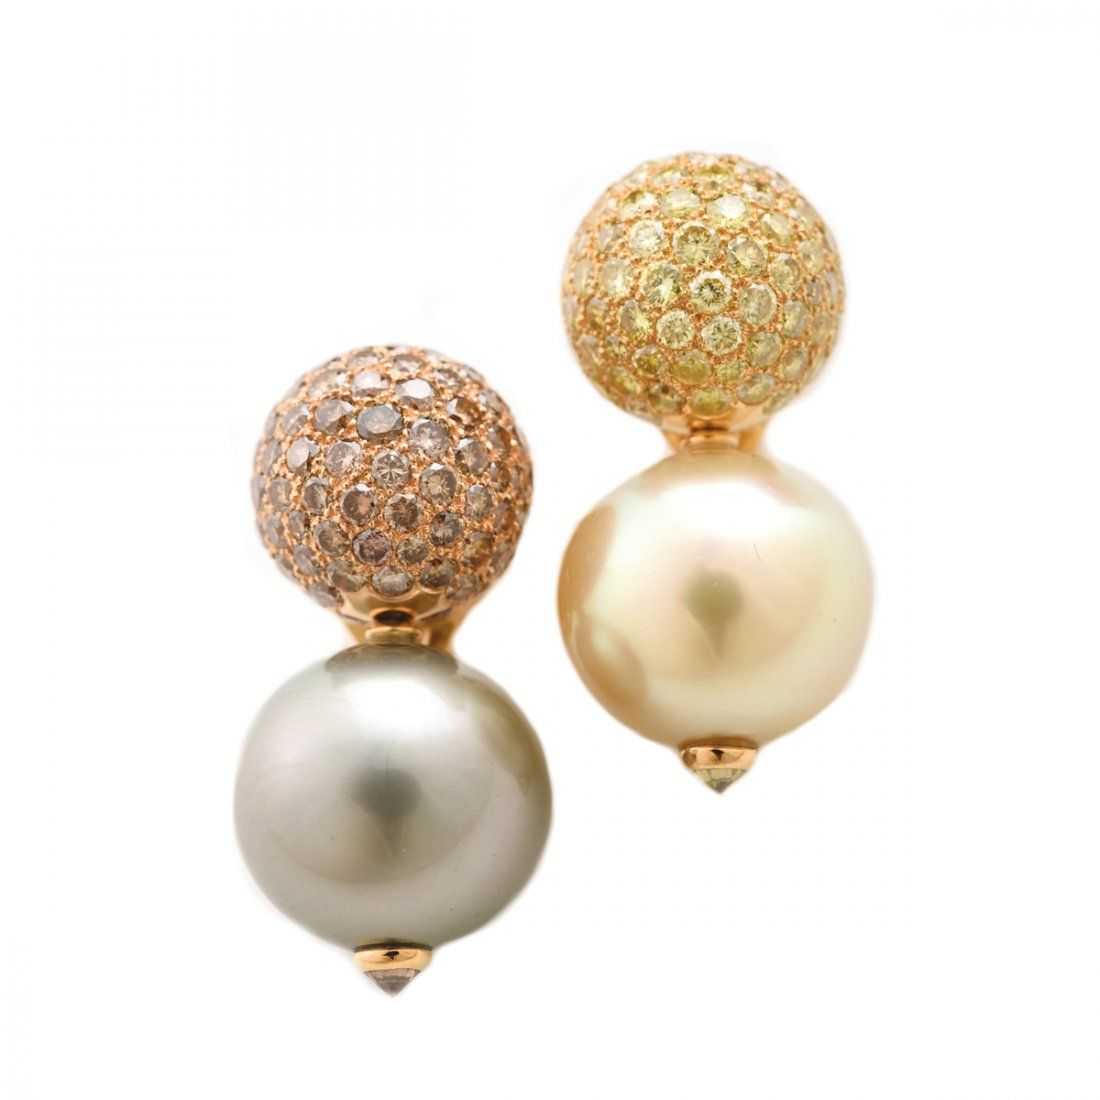 A pair of Chanel Day into Night diamond and cultured pearl earrings performed just above its $4,000-$6,000 estimate when it sold for $4,750 plus the buyer’s premium in December 2018. Image courtesy of Michaan’s Auctions and LiveAuctioneers.